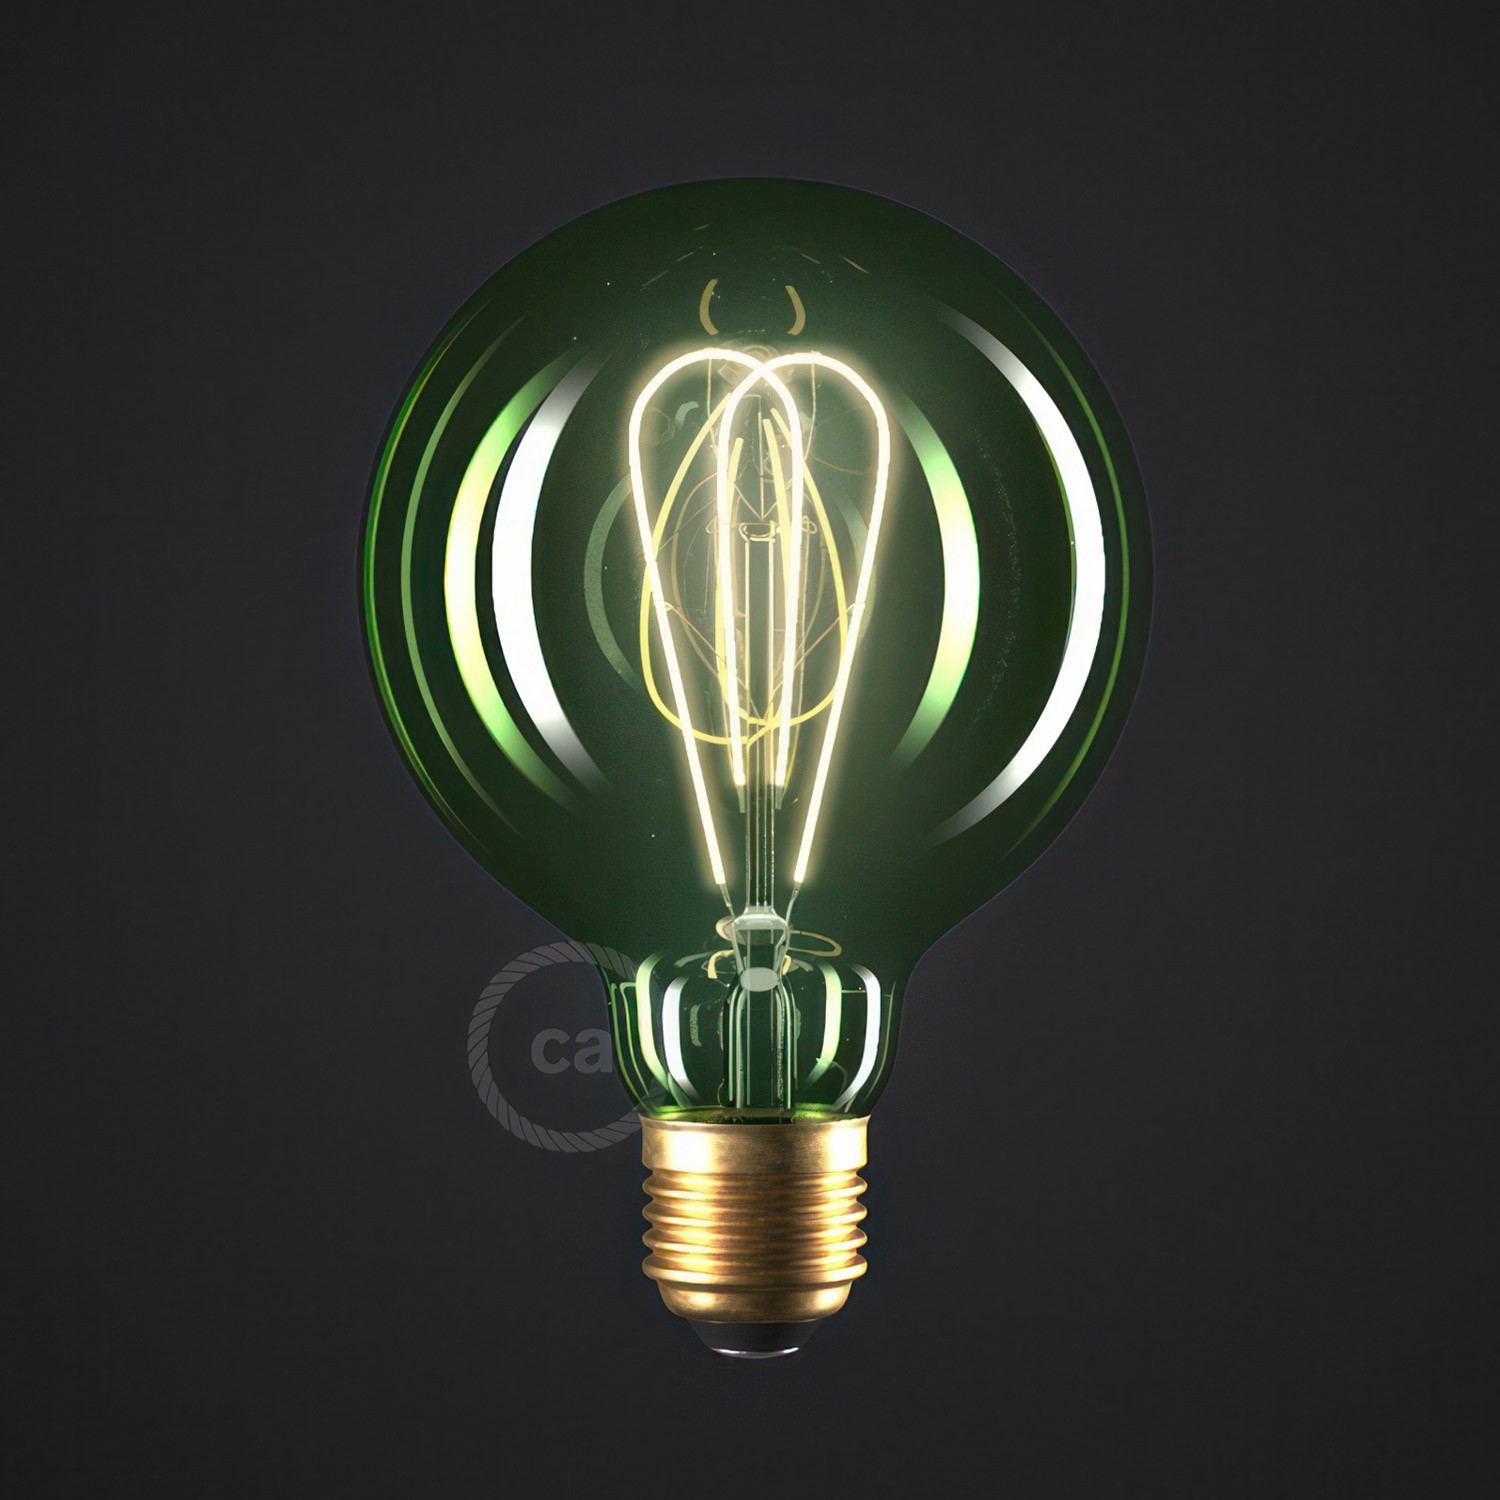 LED Emerald Light Bulb - Globe G95 Curved Double Loop Filament - 5W 280Lm E27 2200K Dimmable